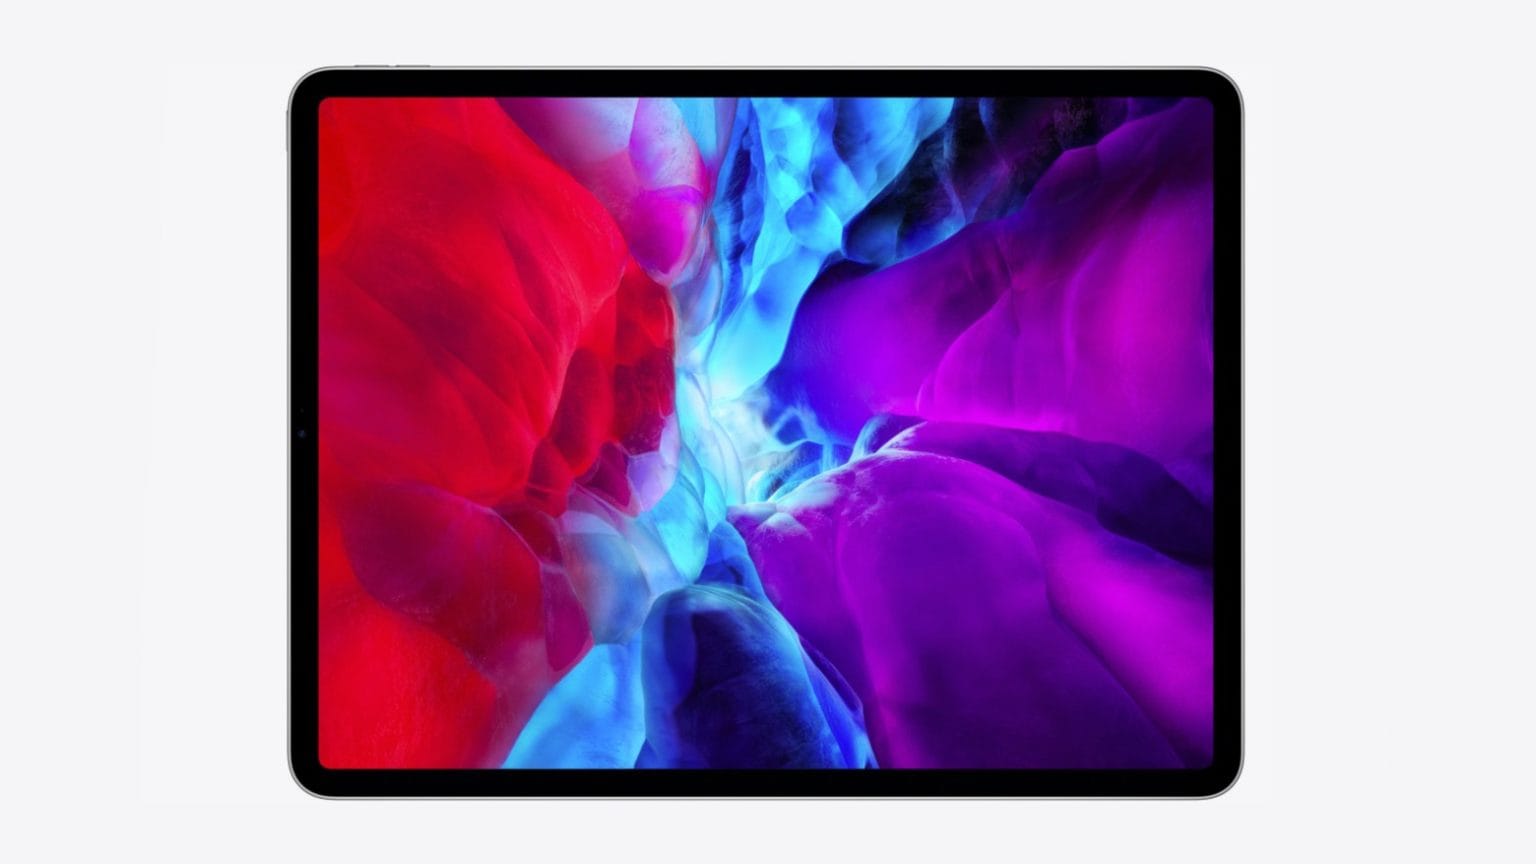 2020 iPad Pro with official wallpaper